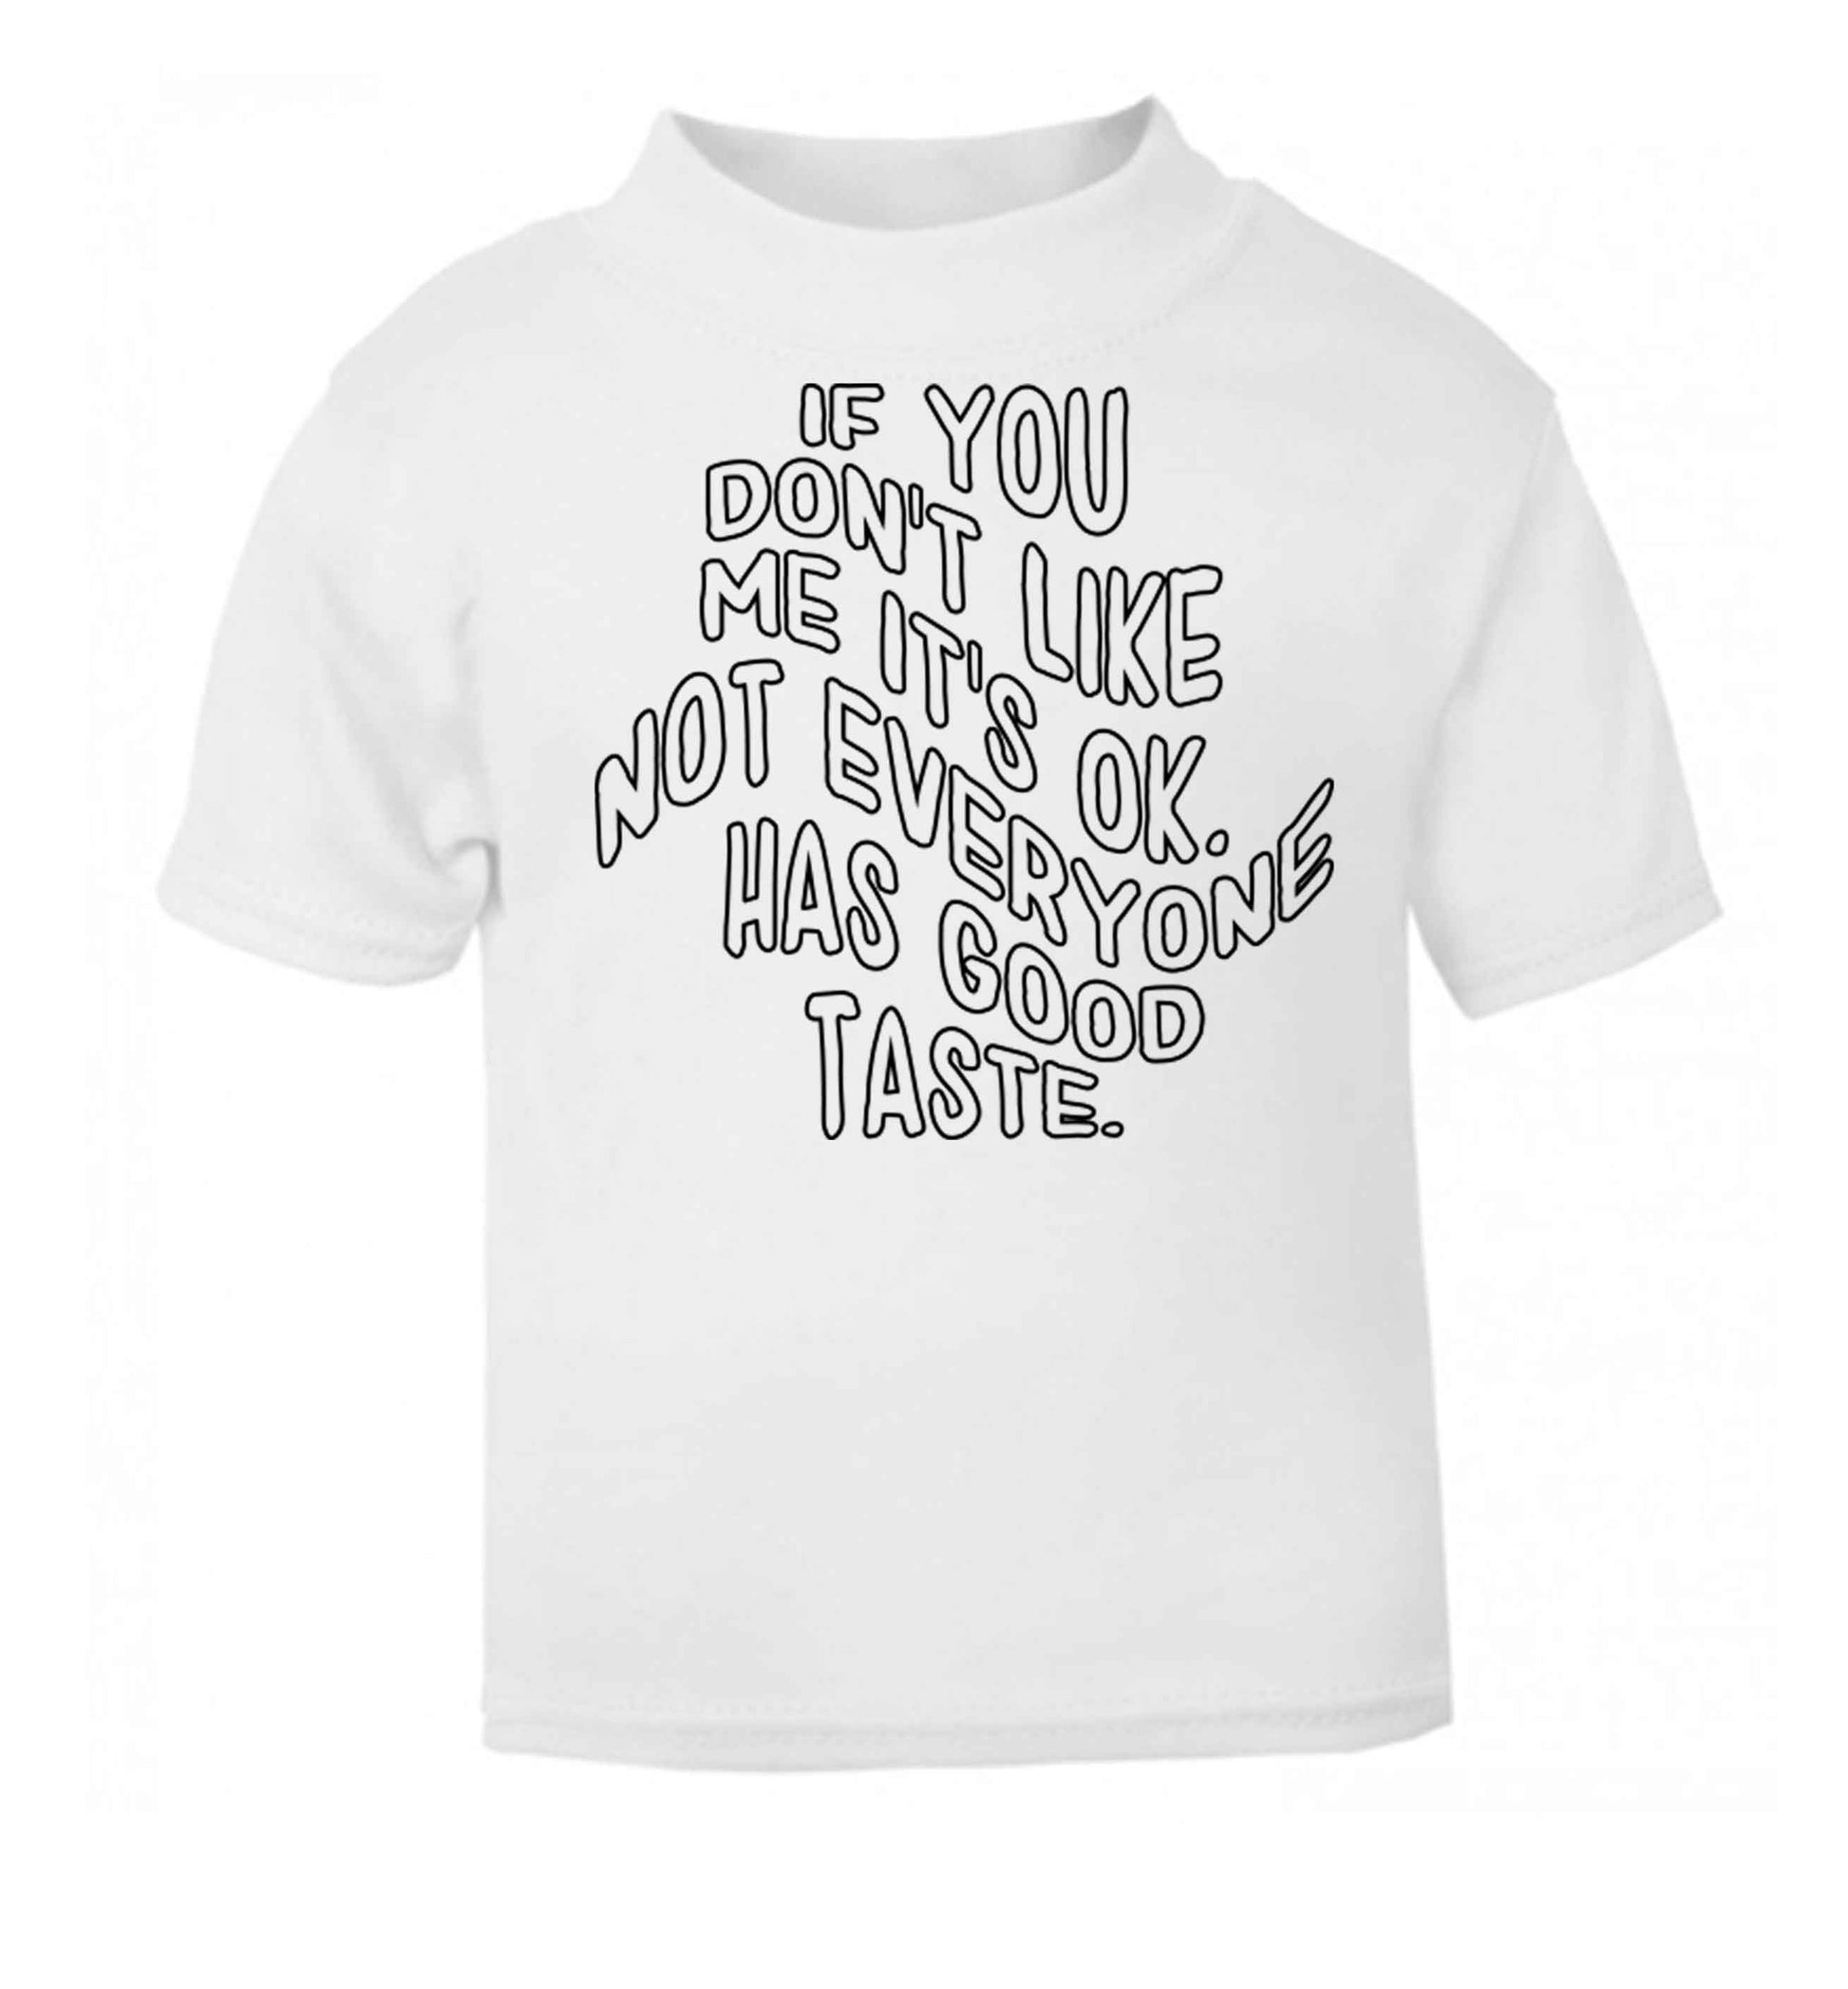 If you don't like me it's ok not everyone has good taste white baby toddler Tshirt 2 Years